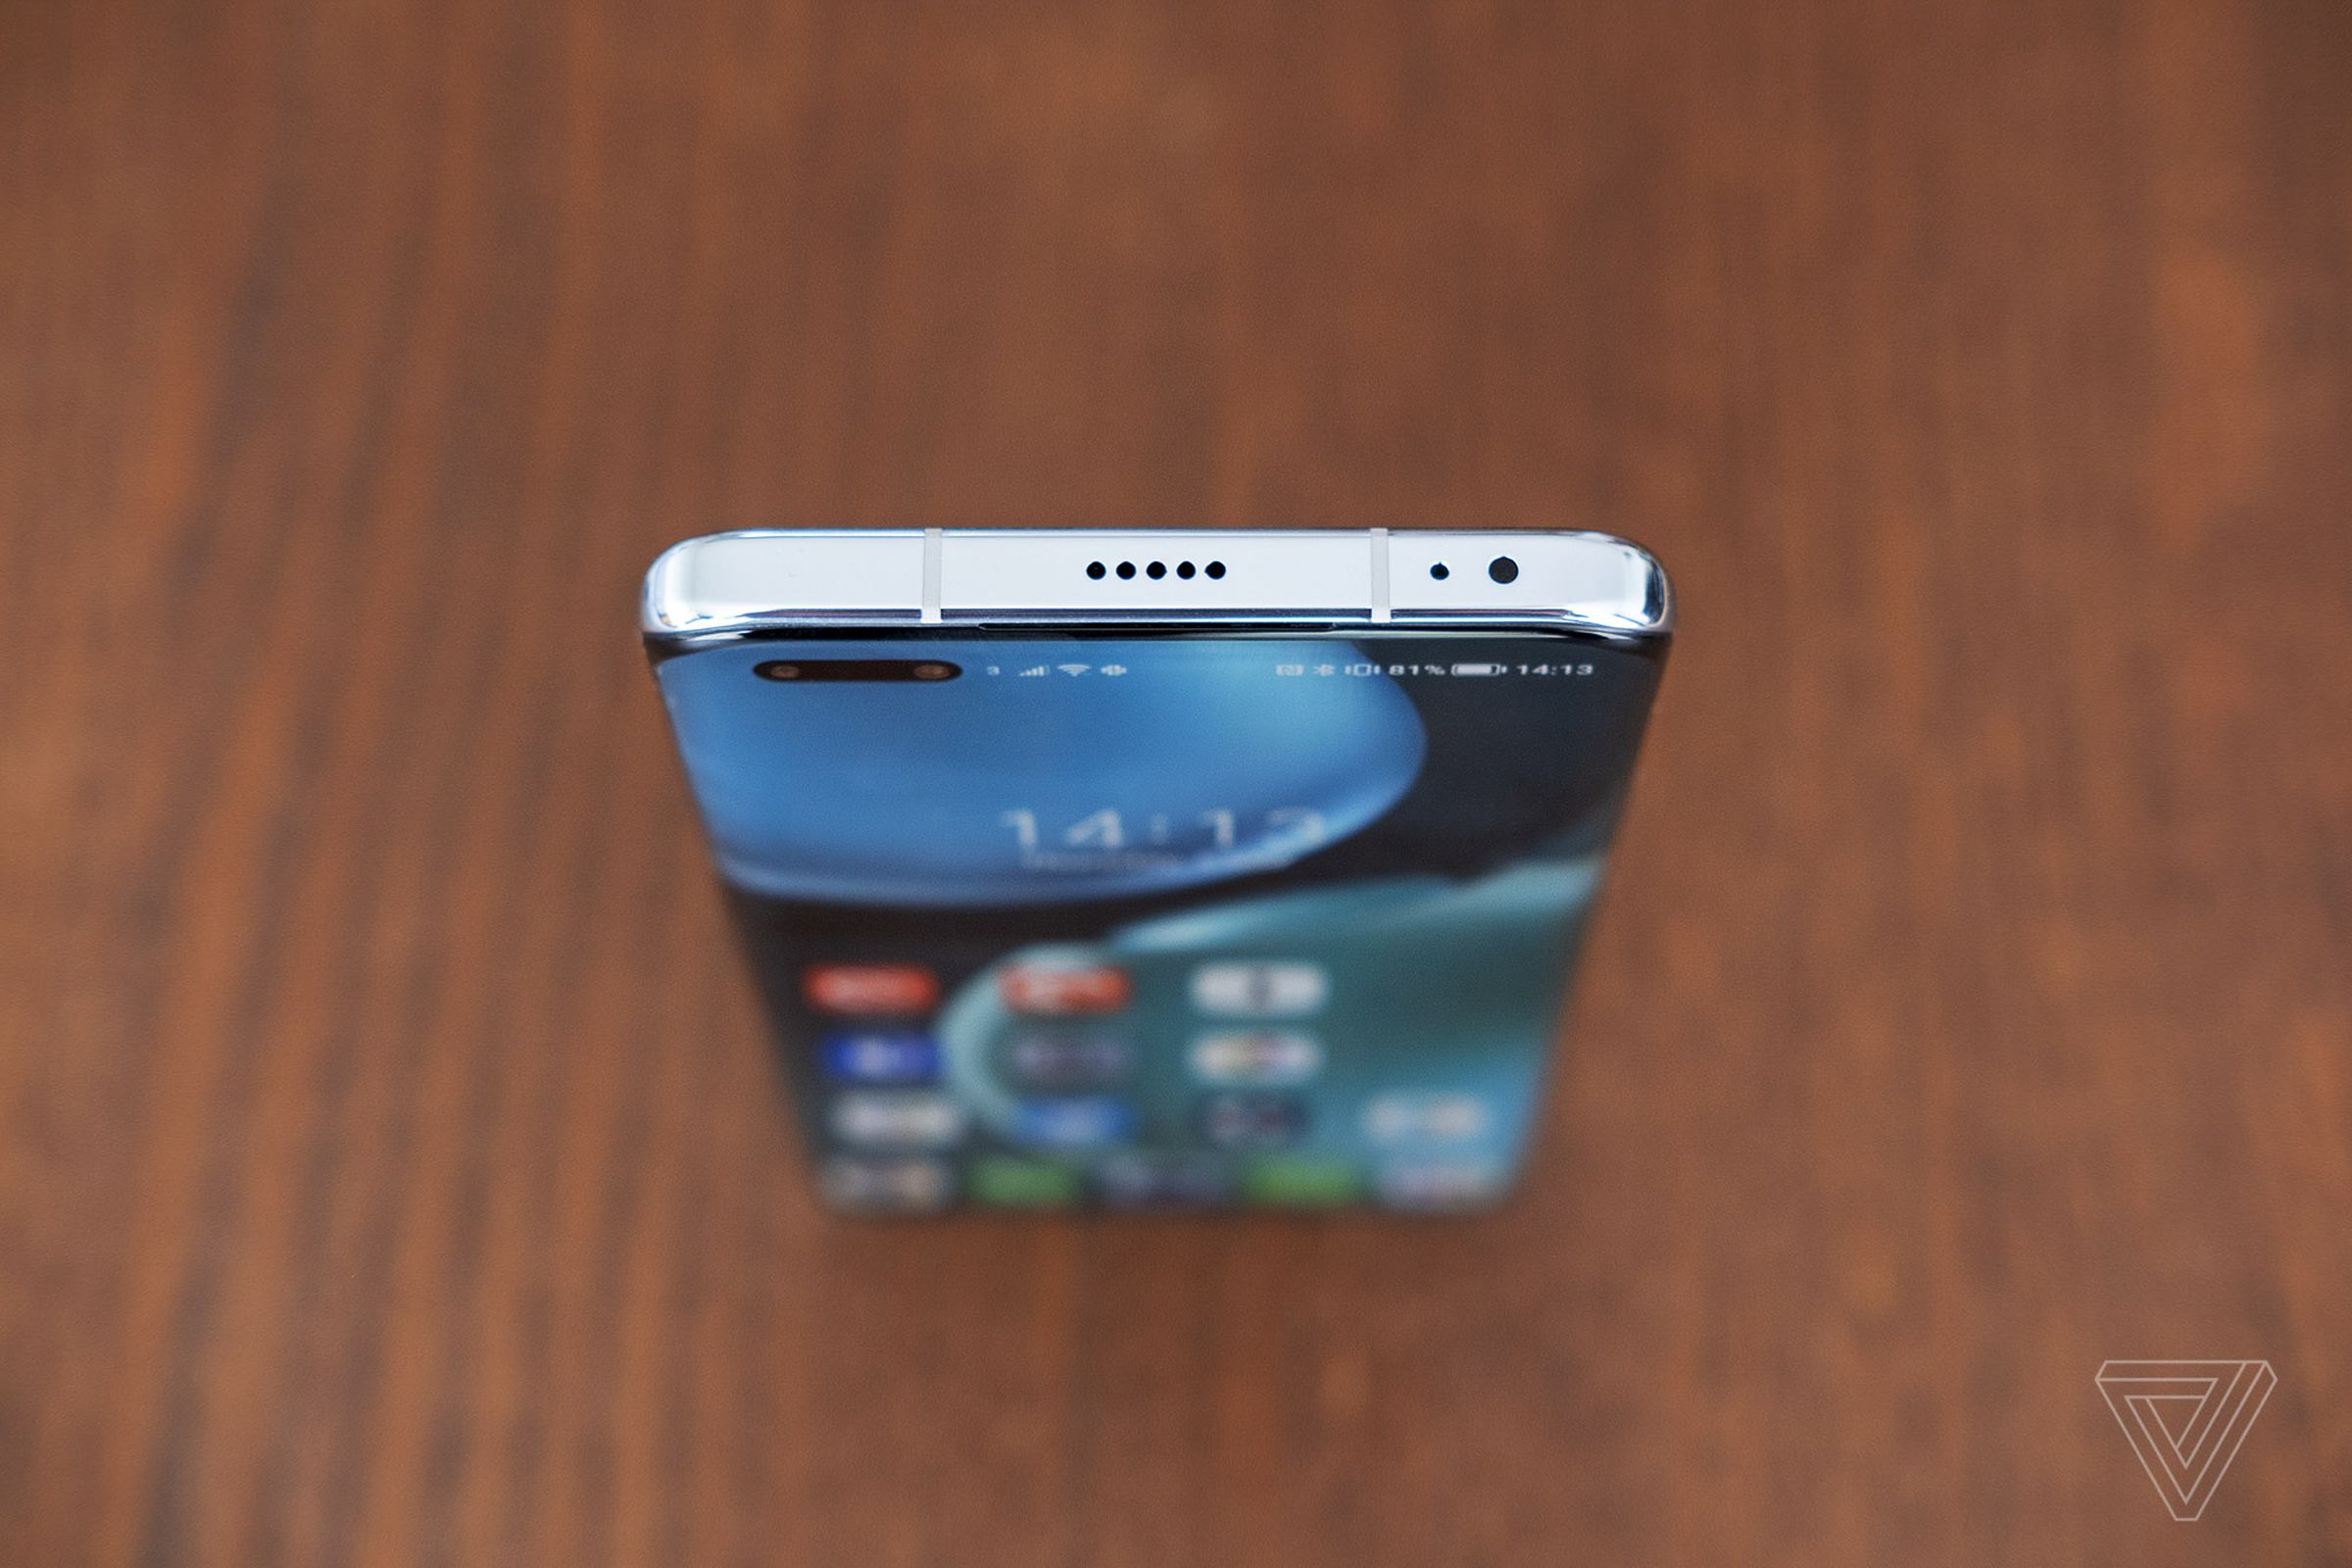 The display curves round the left and right sides of the phone.